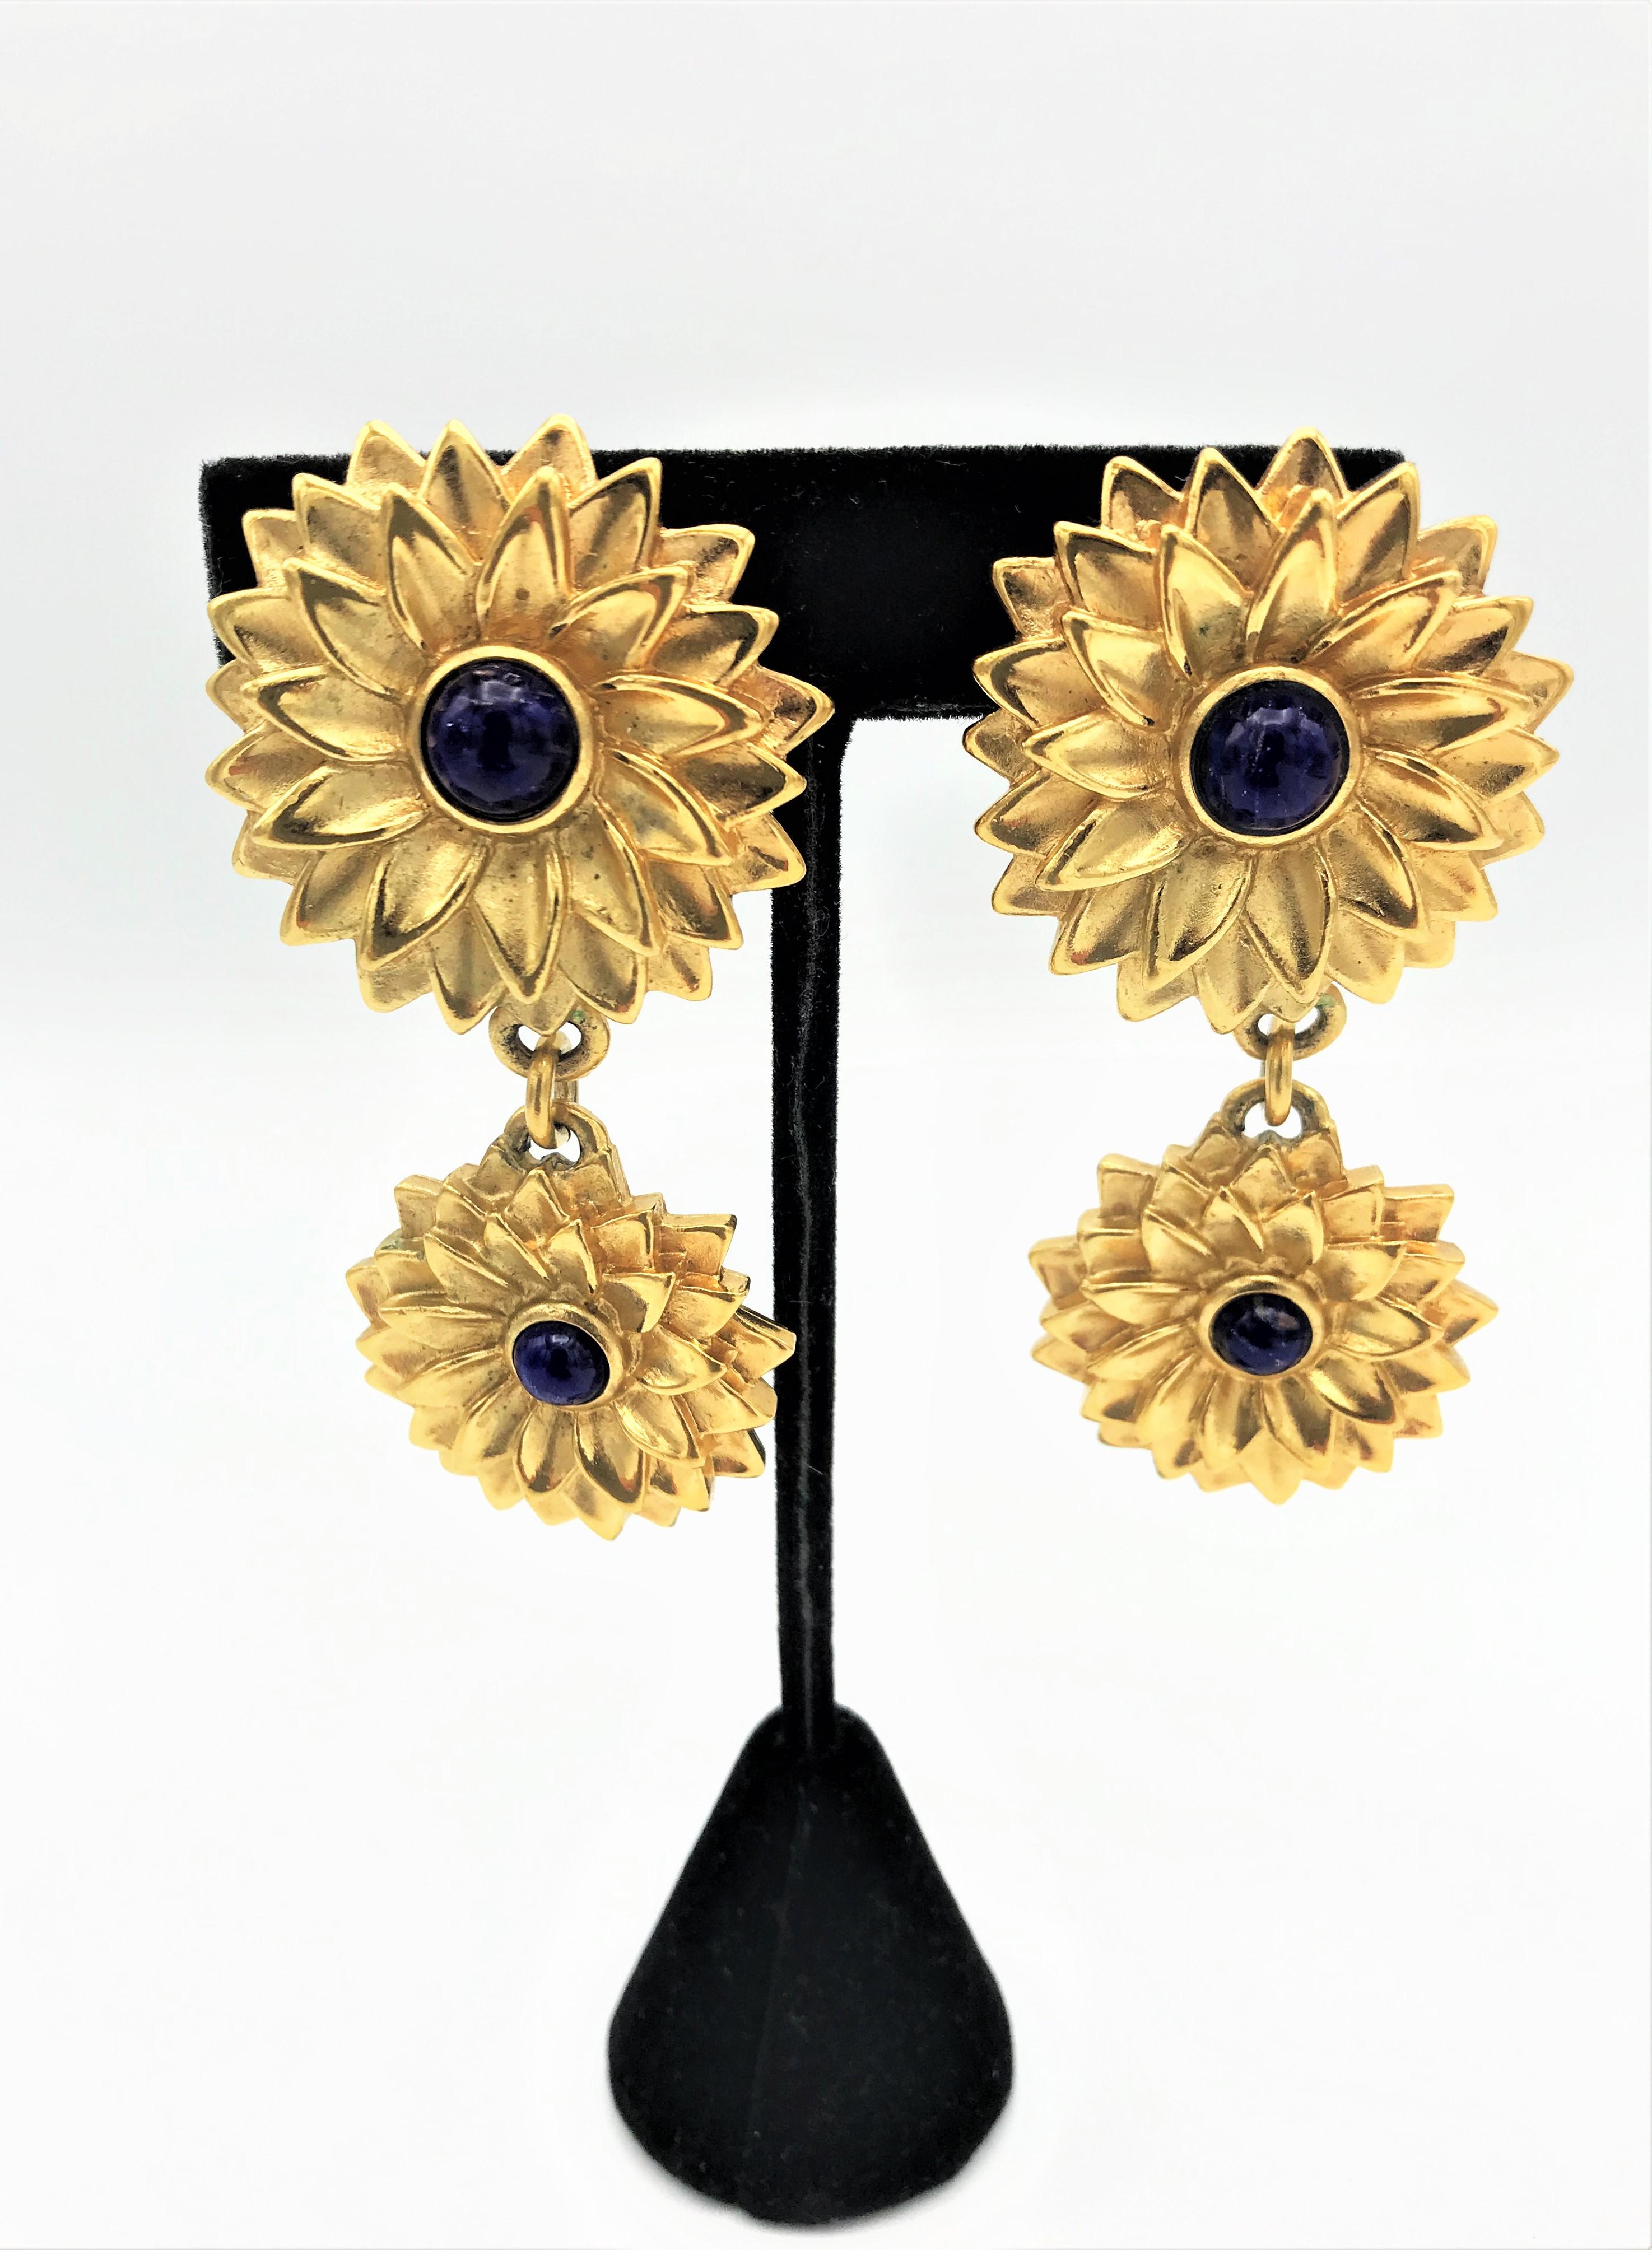 A pair of ear clips from Lanvin/Germany consisting of 2 flowers hanging one below the other with a blue glas stone in the middle. The smaller flower hangs from the larger margaret flower above.
Measurement:
Height  7 cm 
The upper flower 3.5 cm 